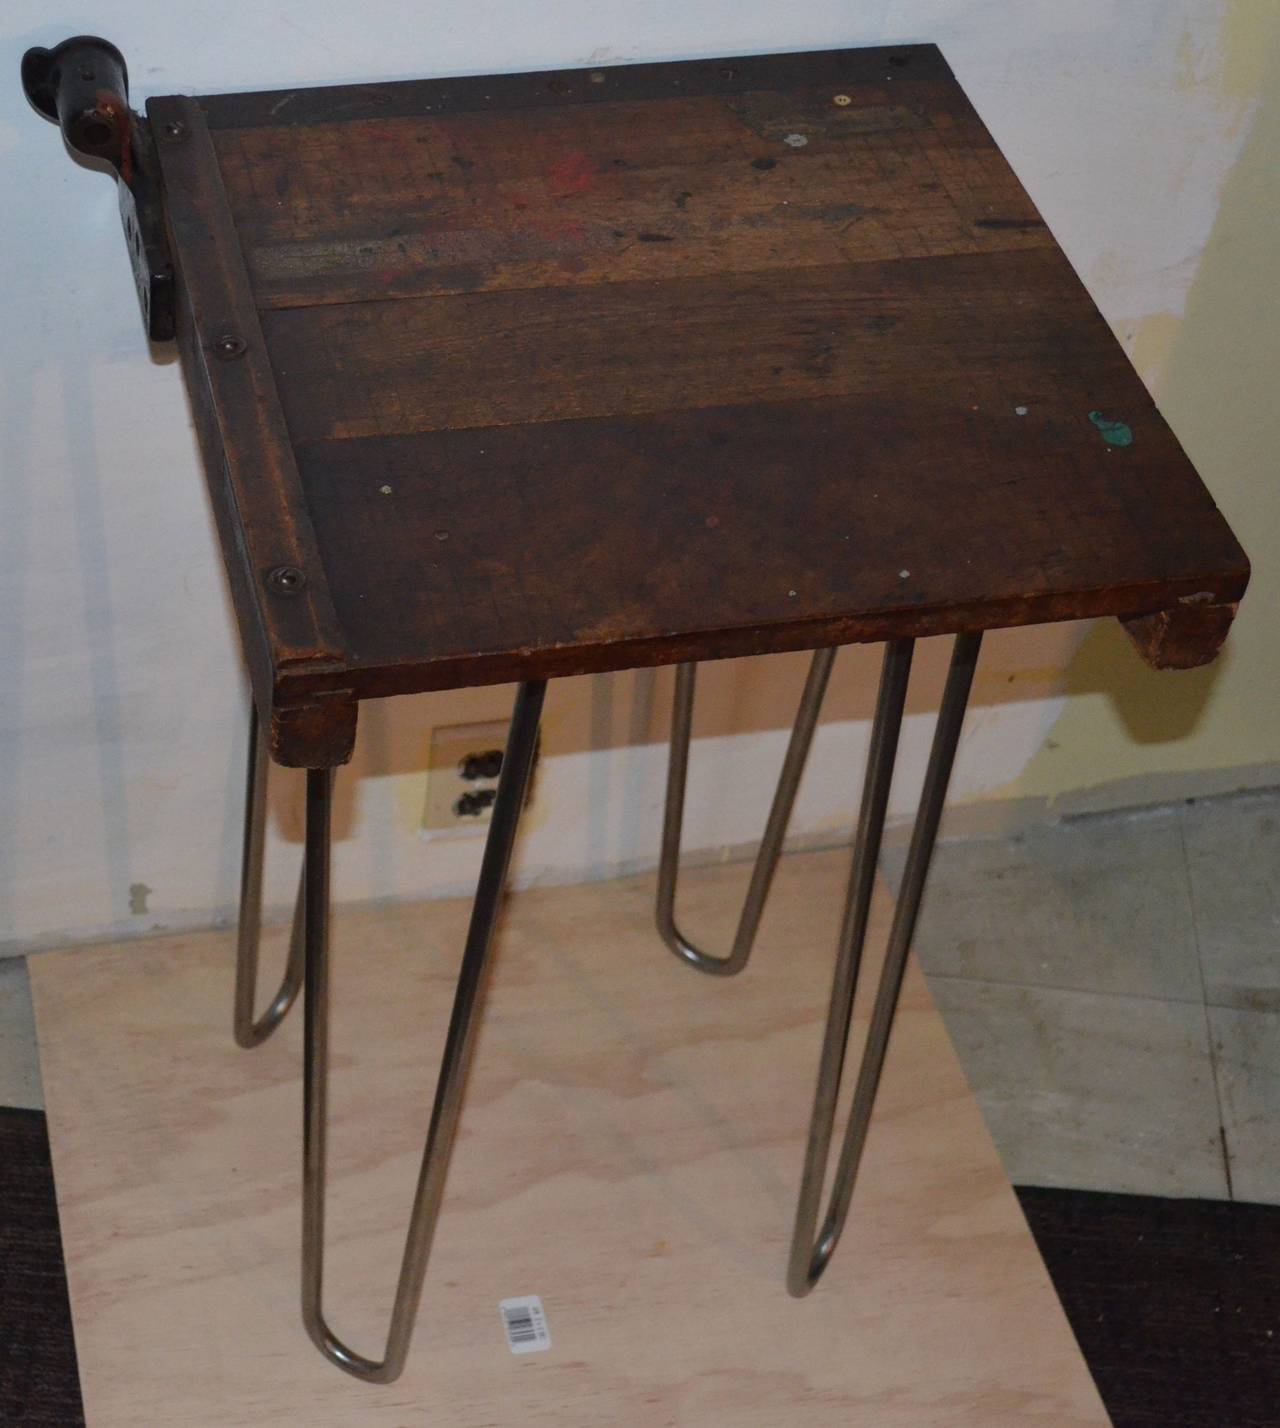 Table has been fashioned from a vintage classroom paper cutter mounted on heavy duty, stainless steel, hairpin legs. For safety purposes, the paper cutter blade has been removed leaving its cast iron mount and steel ruler intact. From years of use